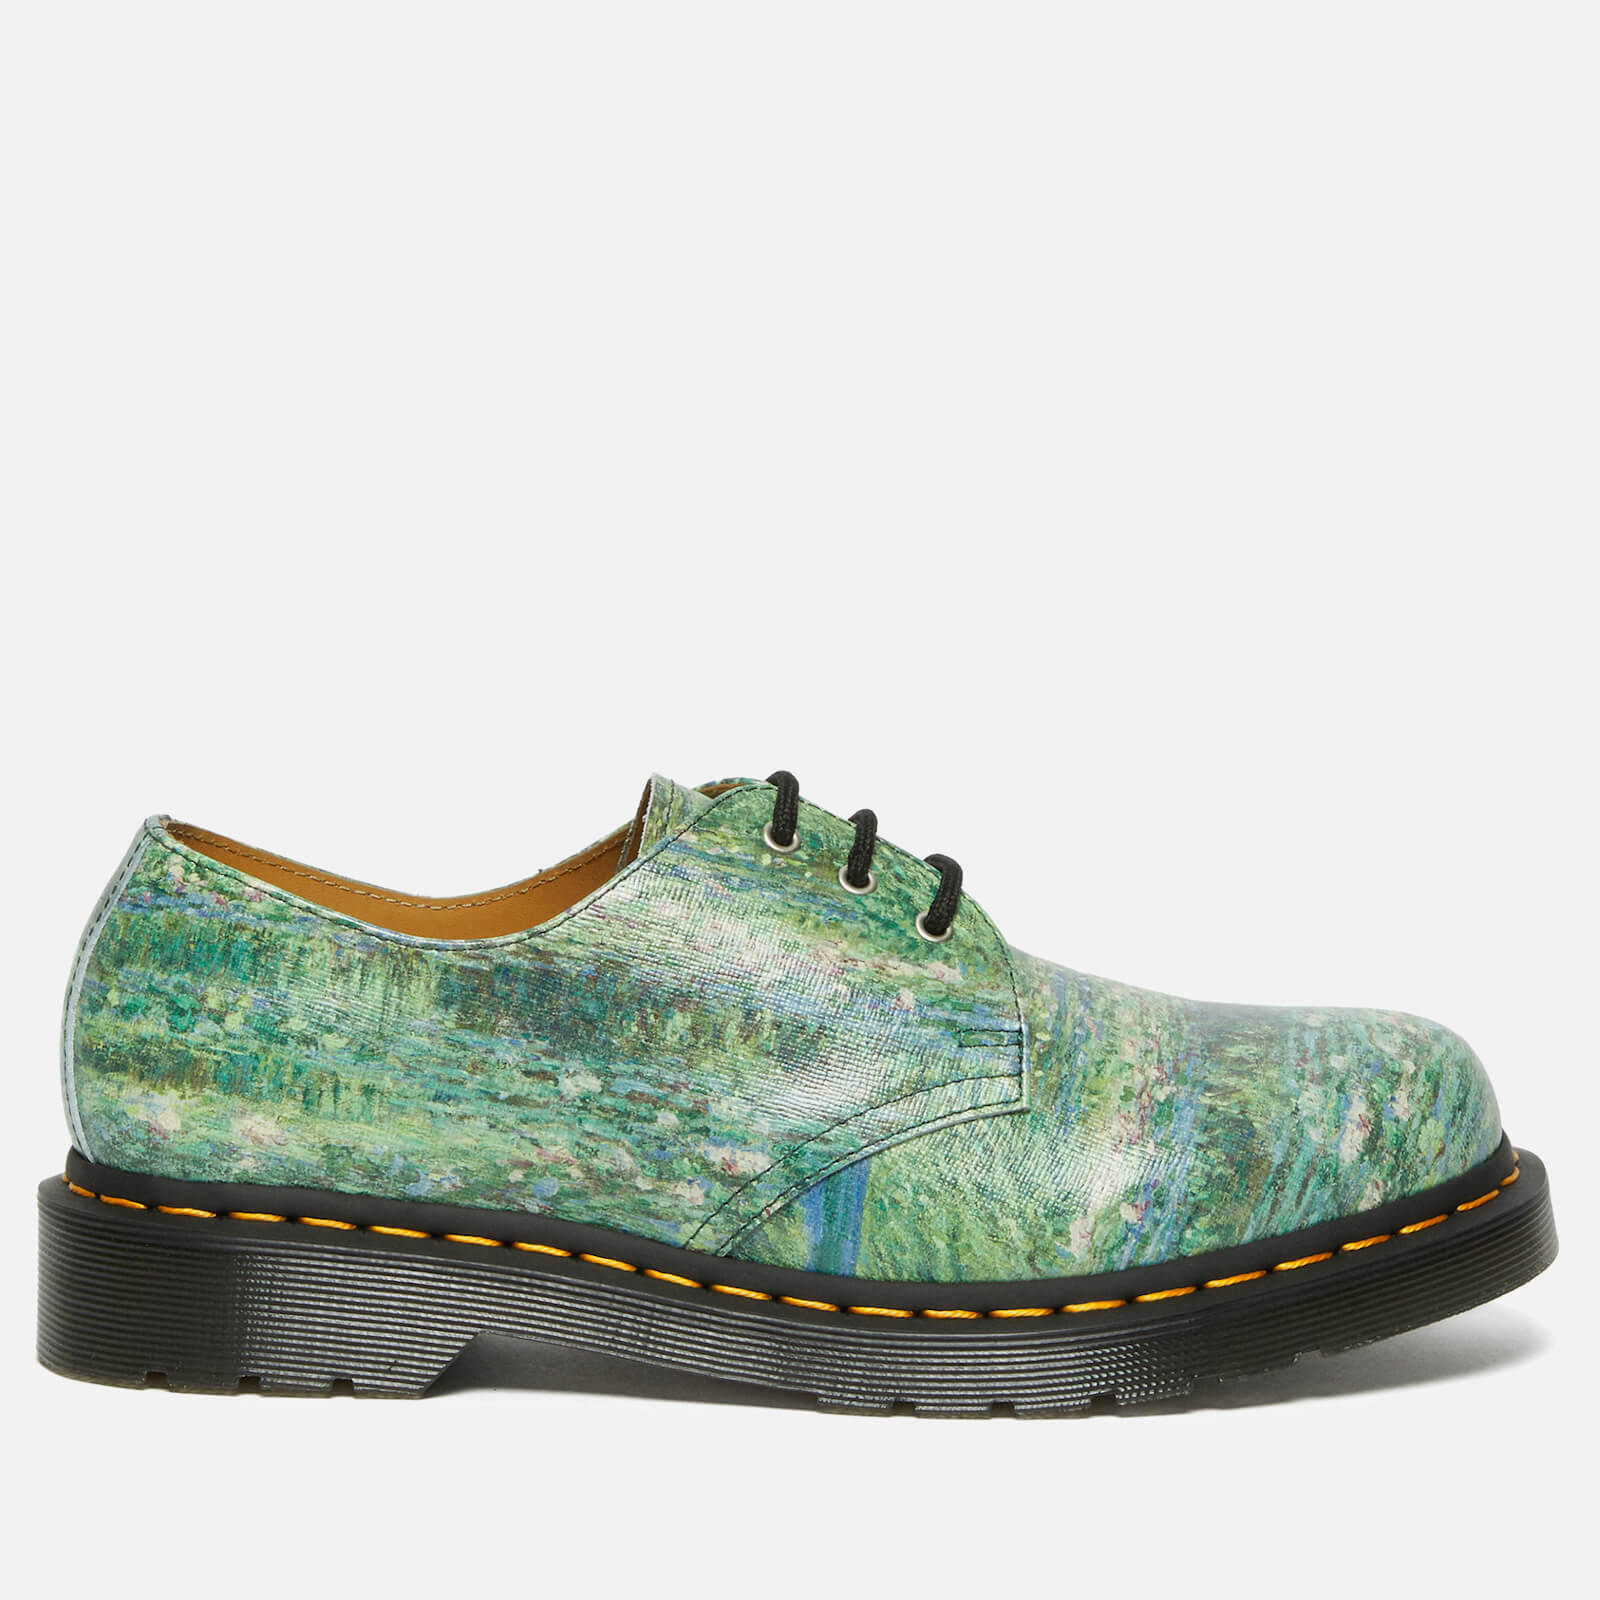 Dr. Martens X The National Gallery 1461 Lily Pond 3-Eye Shoes - Lily Pond - UK 3